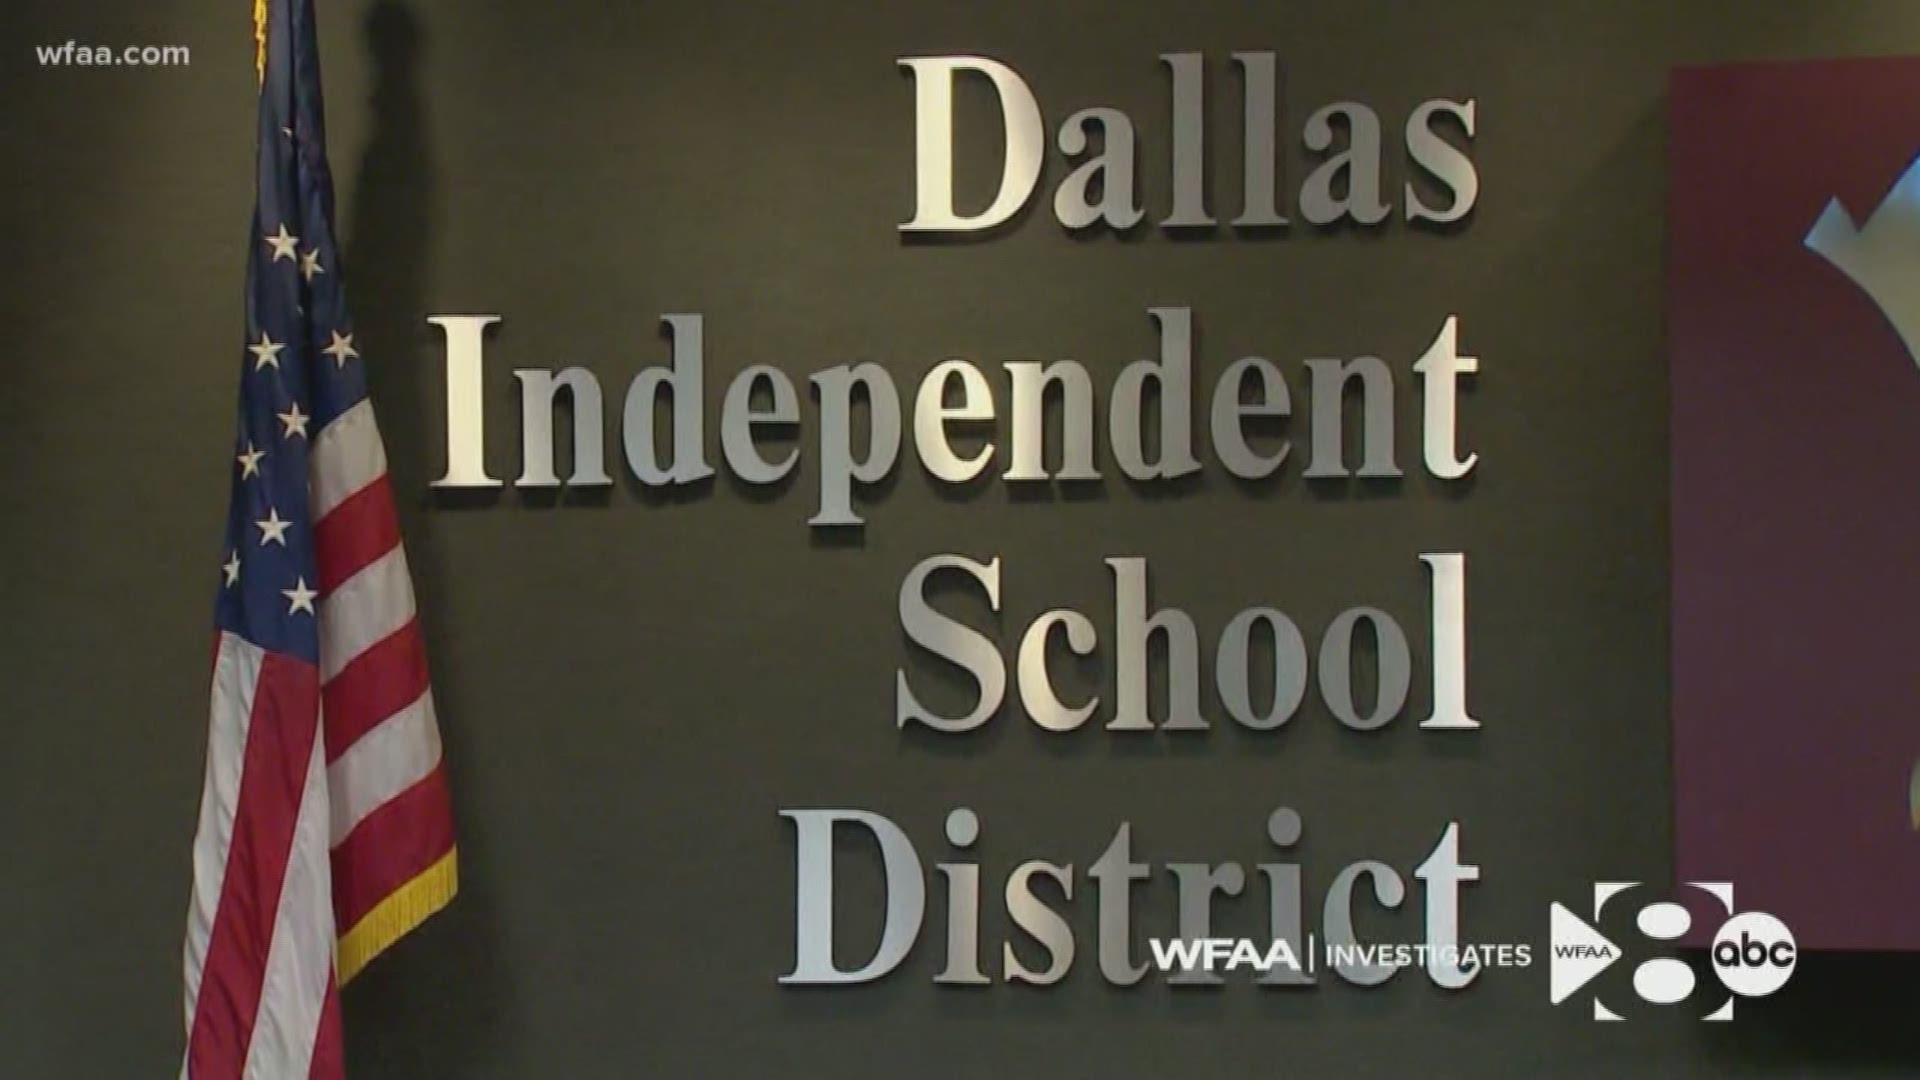 Two separate outside investigations are underway at the Dallas Independent School District (DISD) after WFAA started asking questions about irregularities within its purchasing department that two former employees discovered.